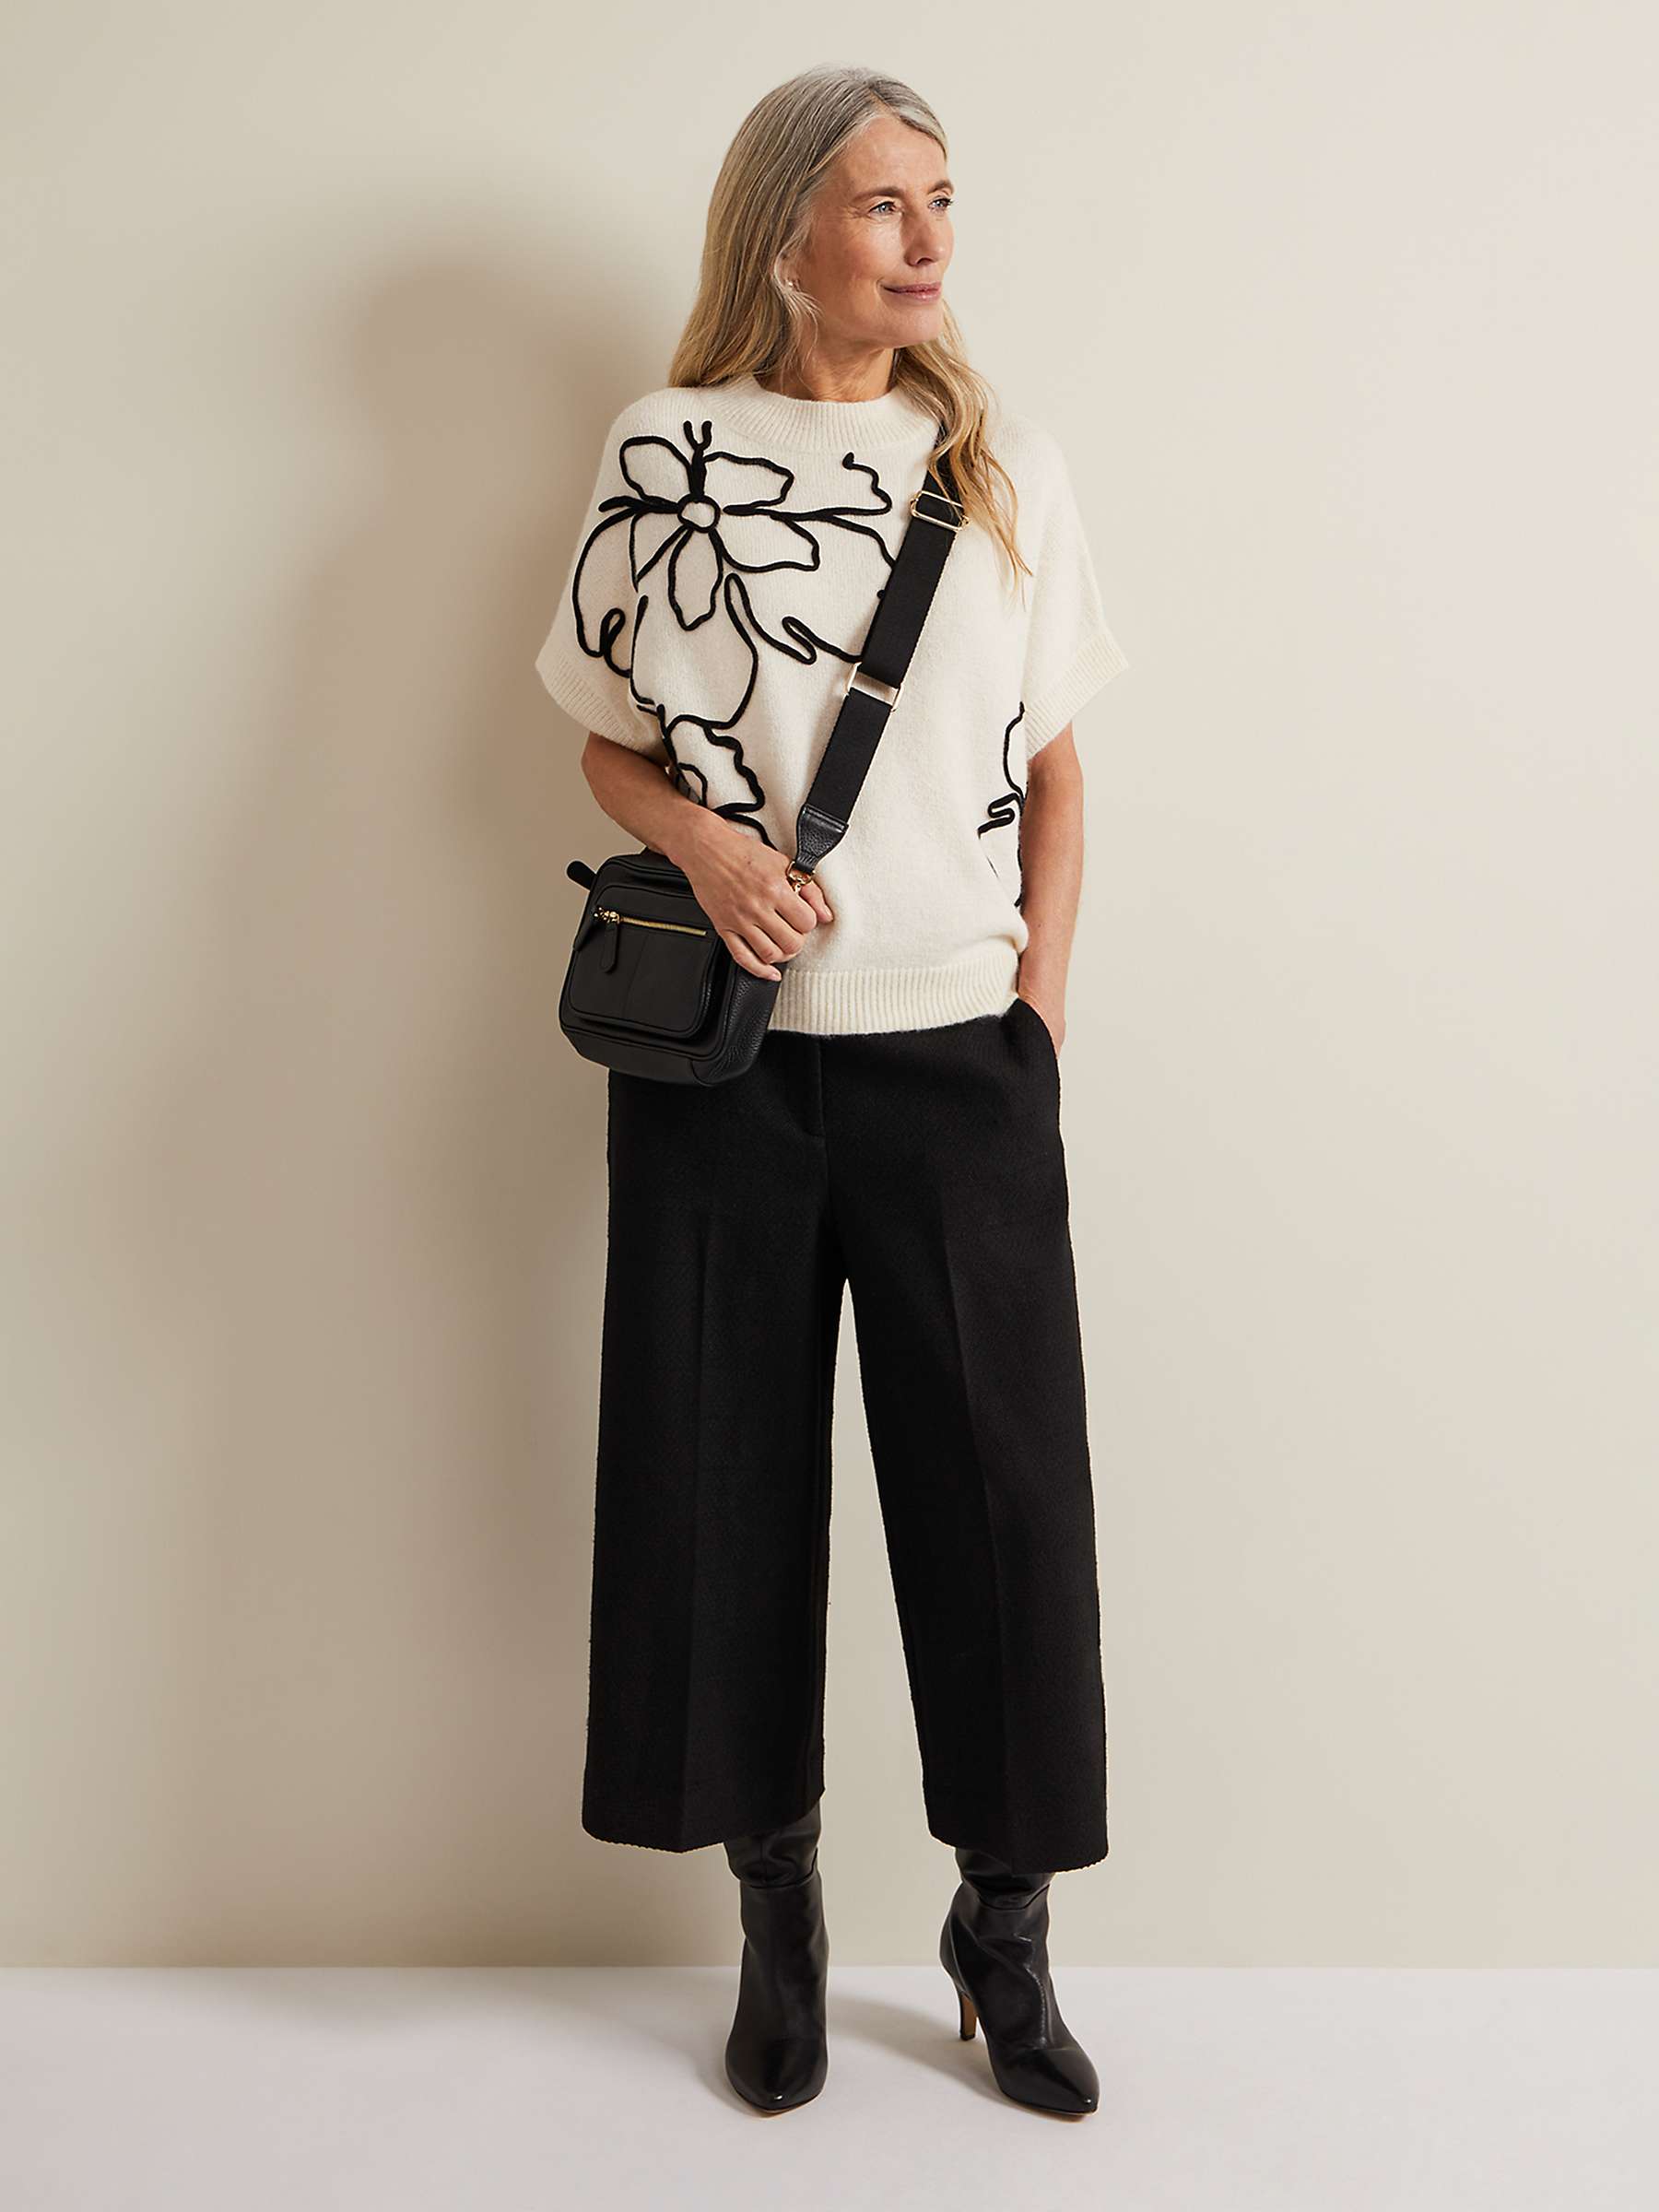 Buy Phase Eight  Arianna Applique Knit Top, Black/Ivory Online at johnlewis.com